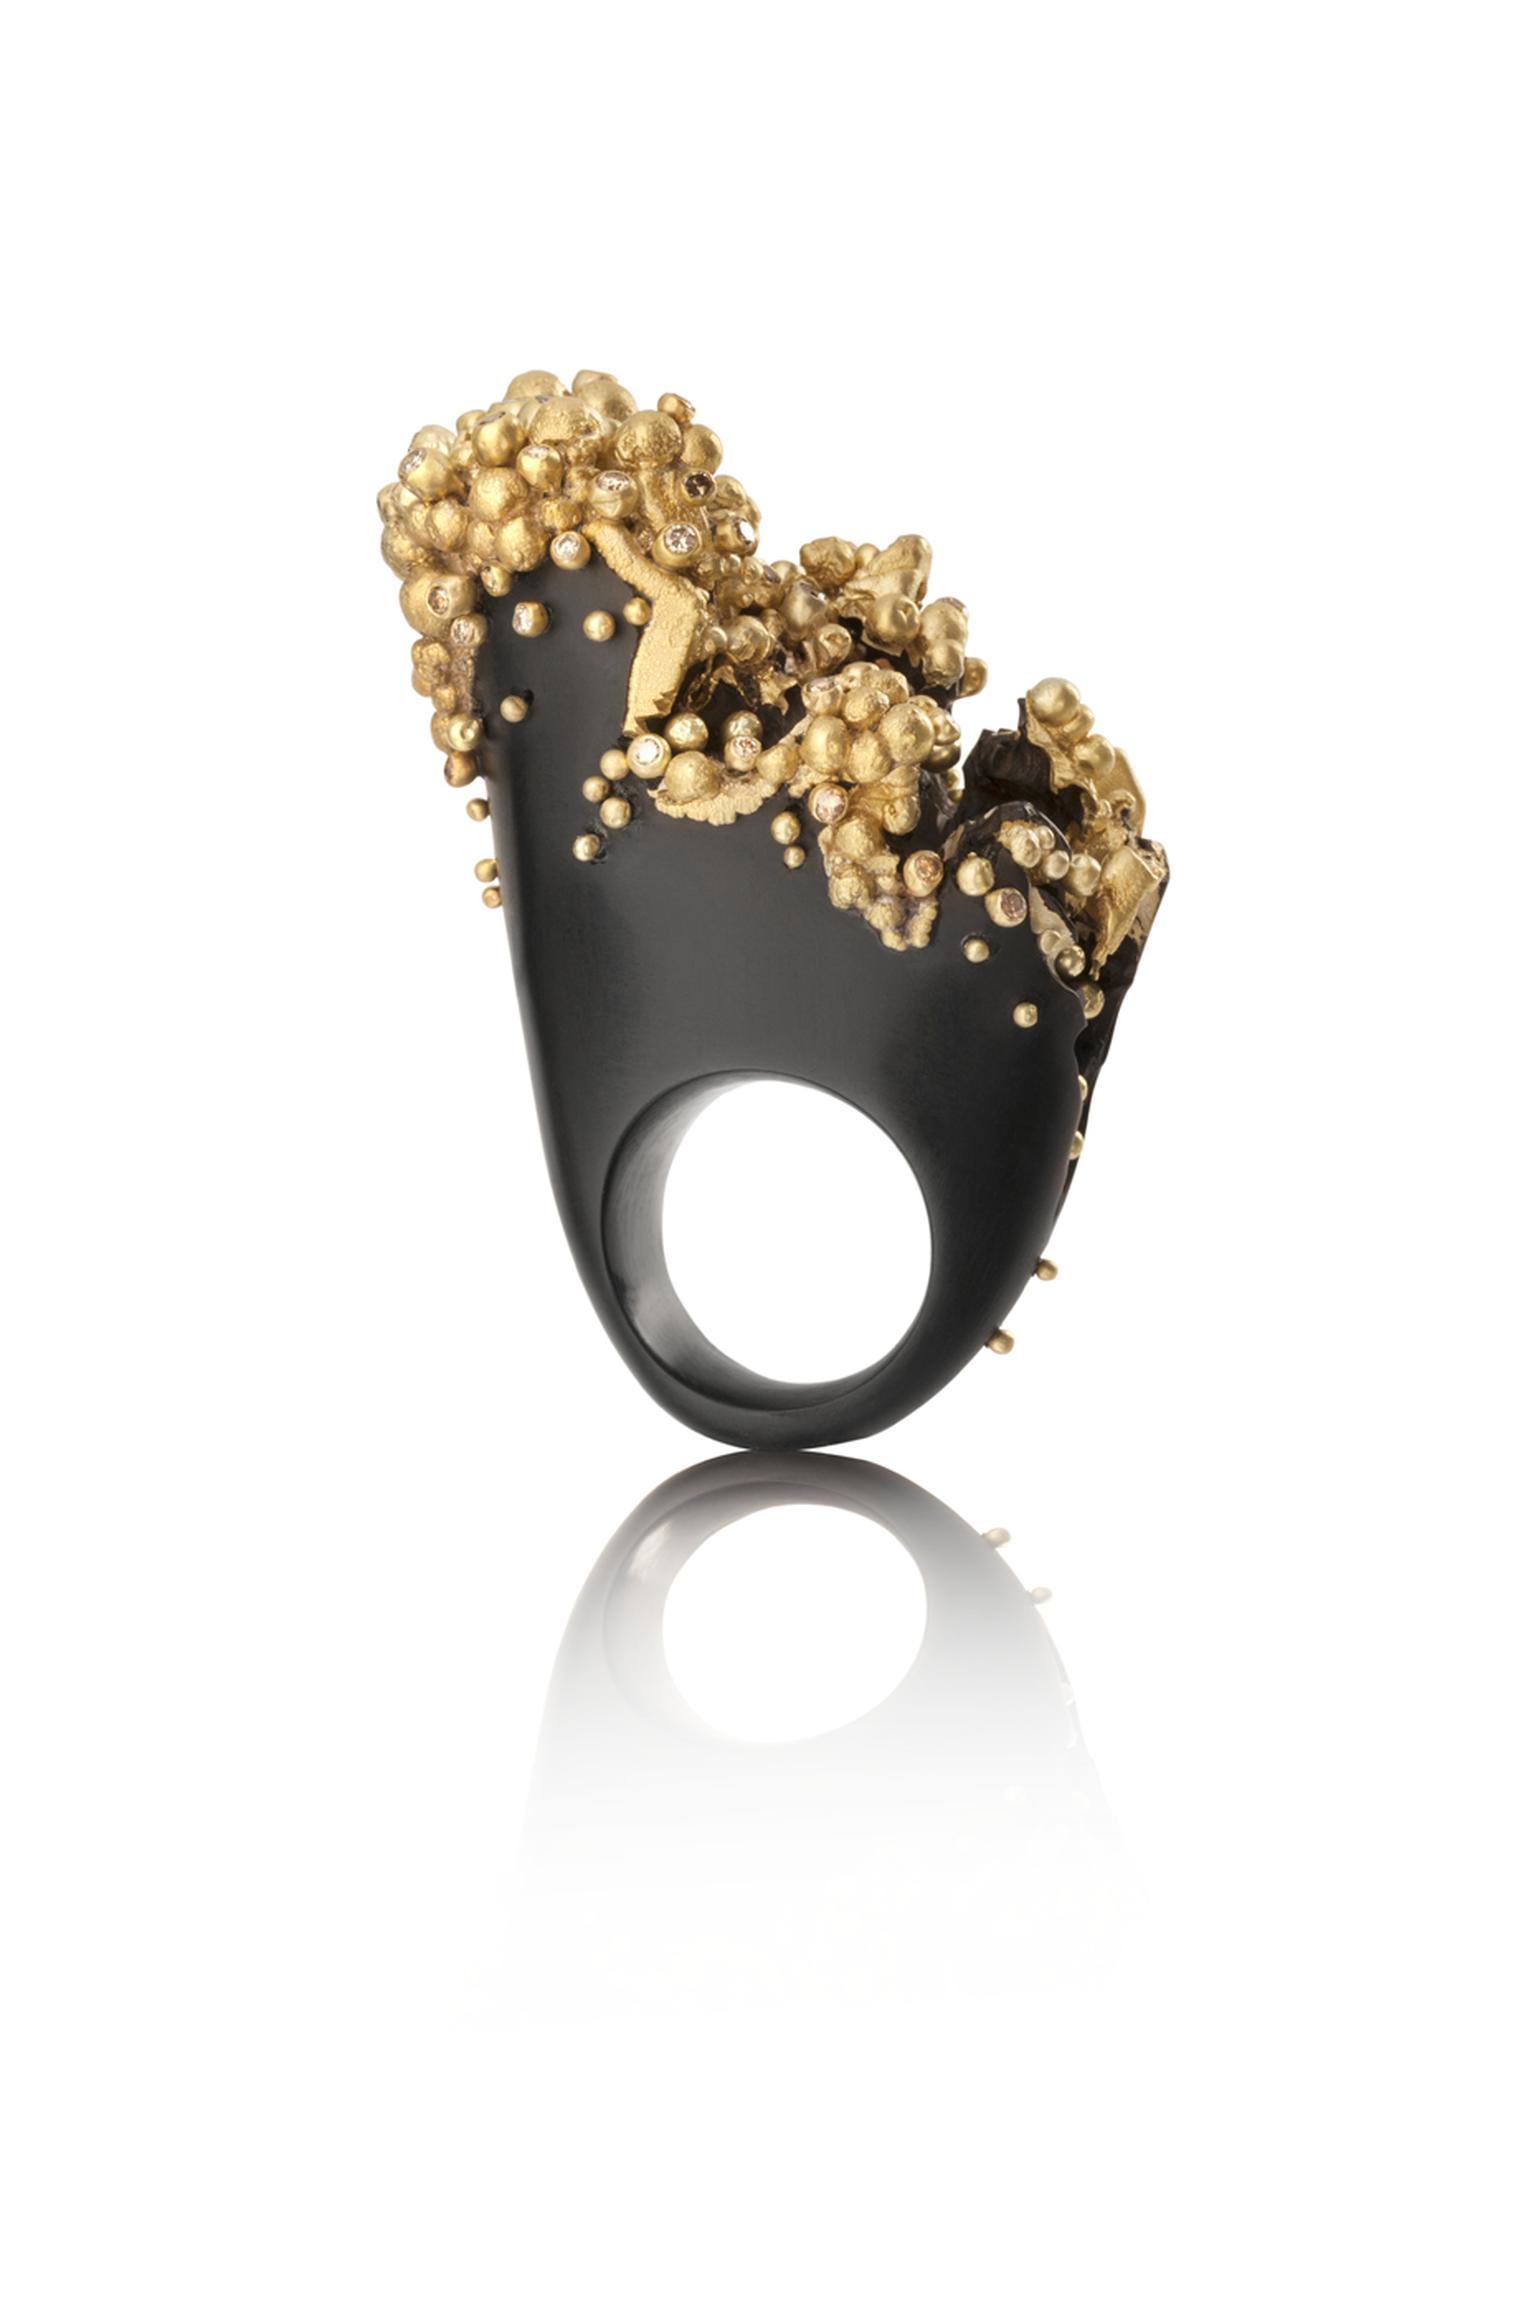 Jacqueline Cullen hand-carved Electro formed Whitby Jet ring with gold granulation overlay, set with champagne diamonds